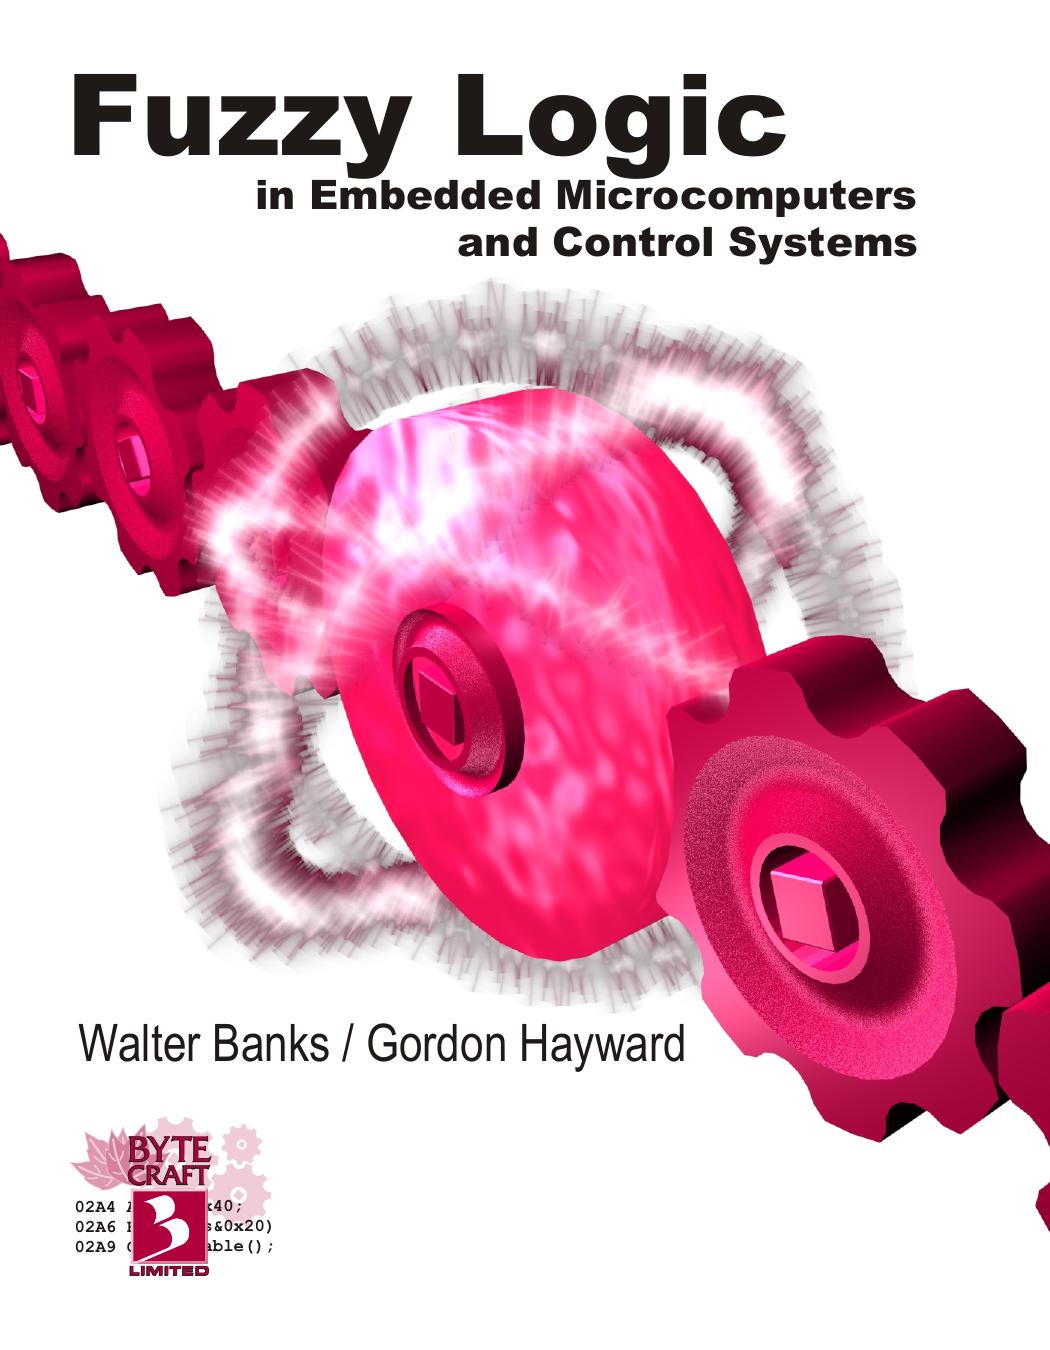 Fuzzy Logic in Embedded Microcomputers and Control Systems